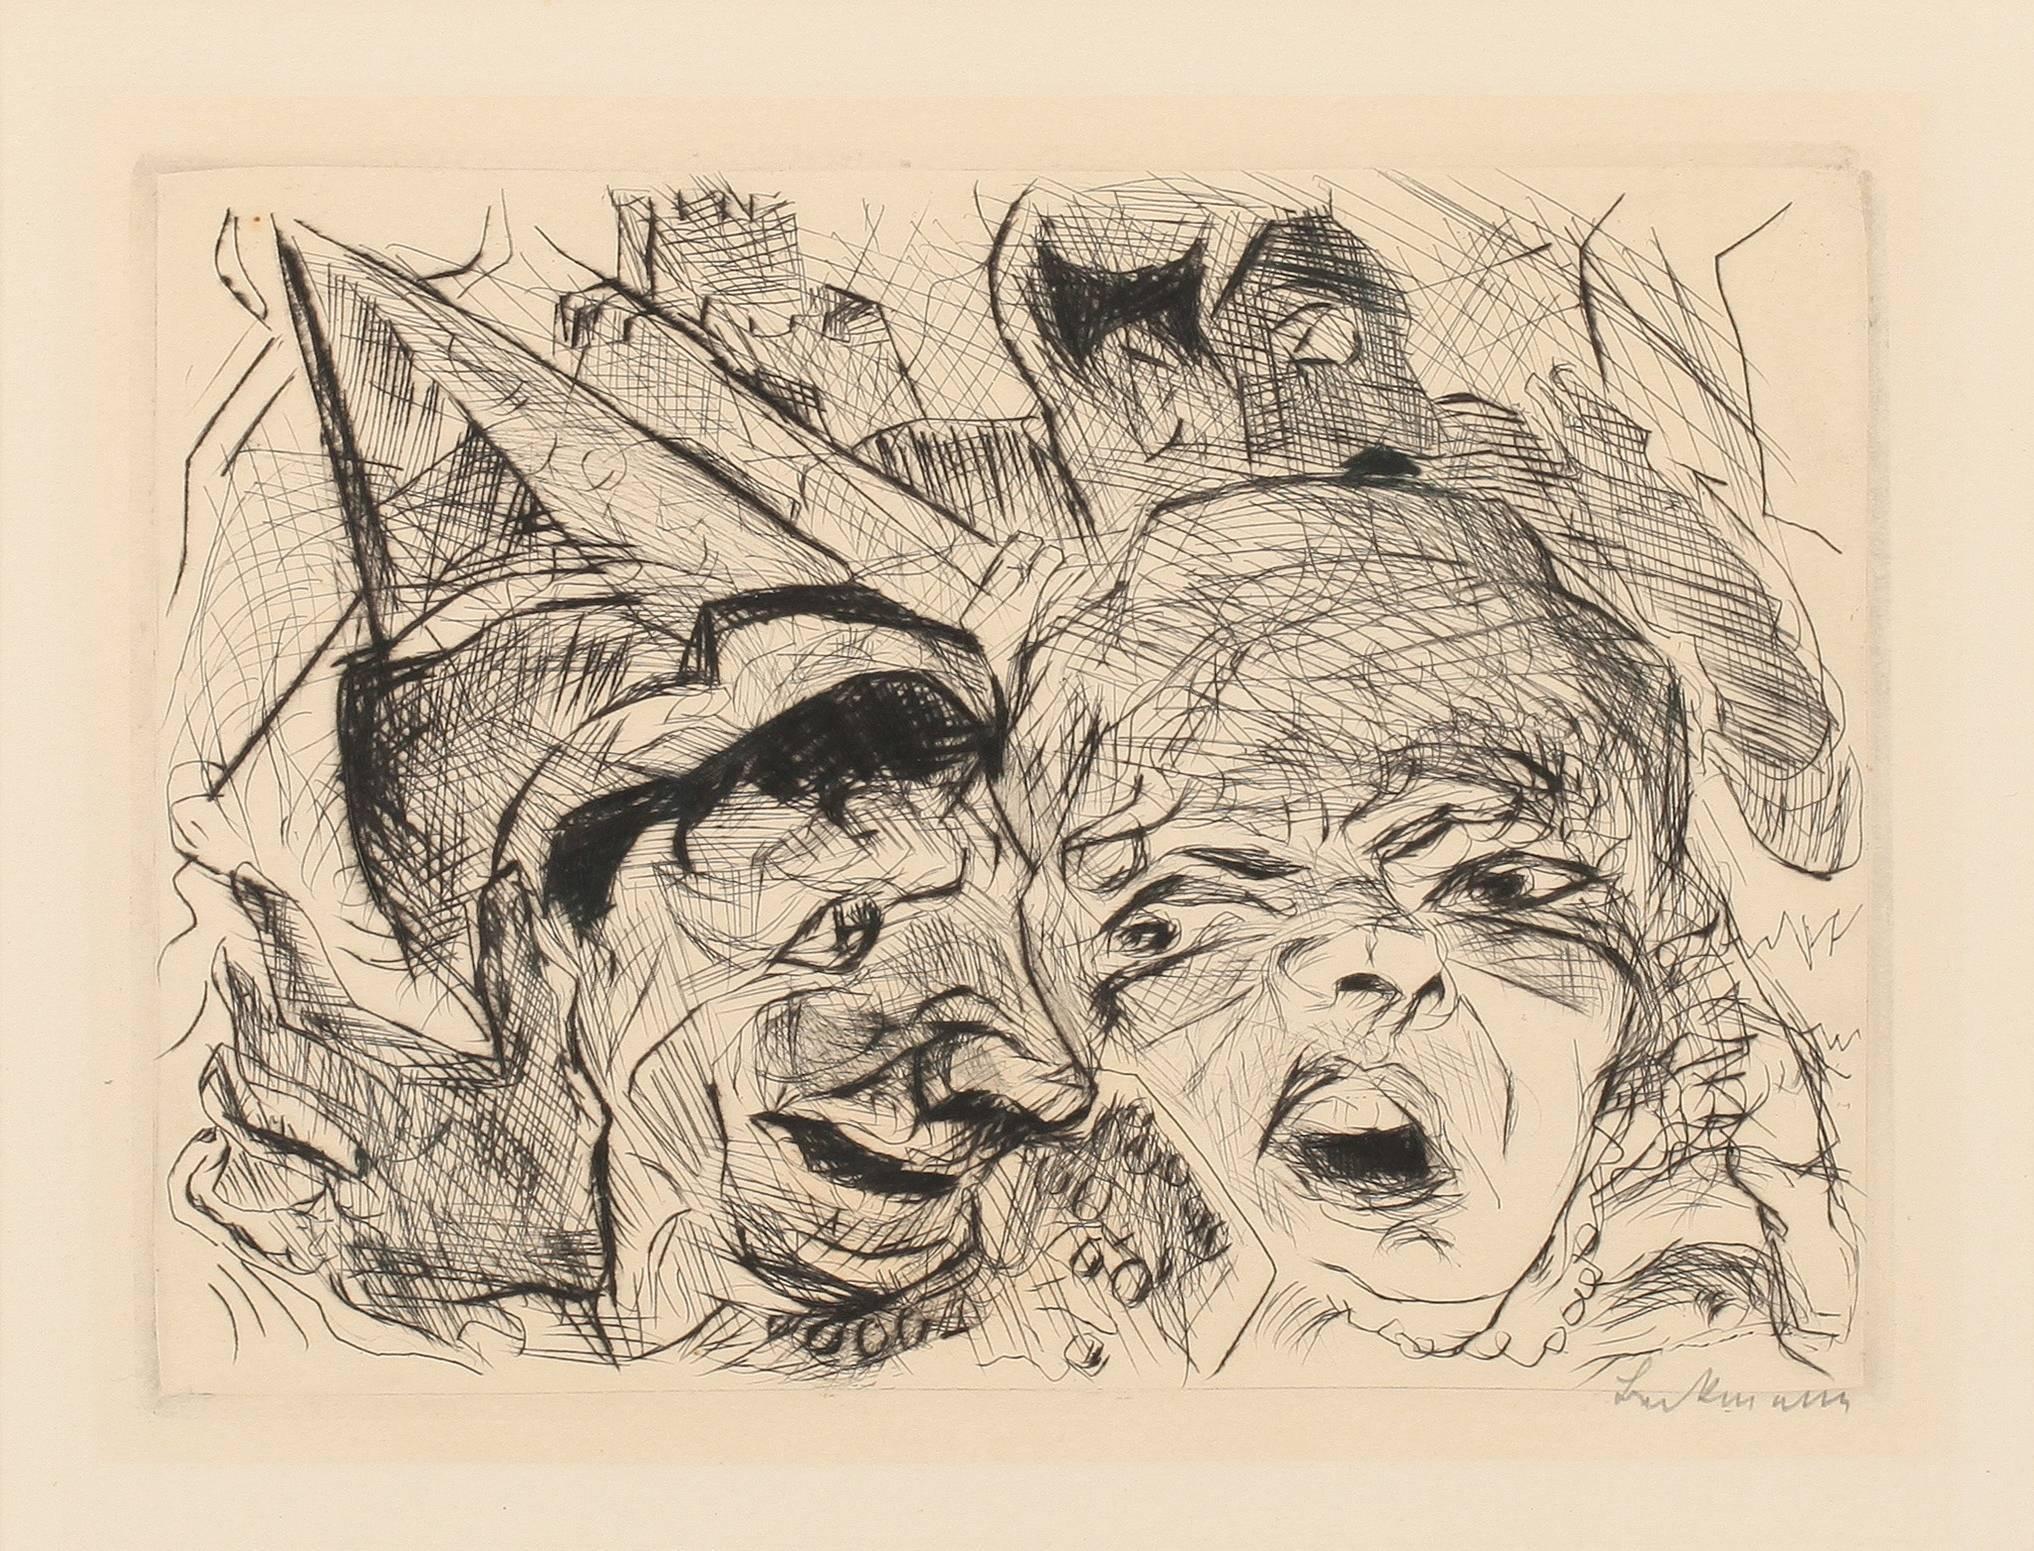 Theater - Print by Max Beckmann